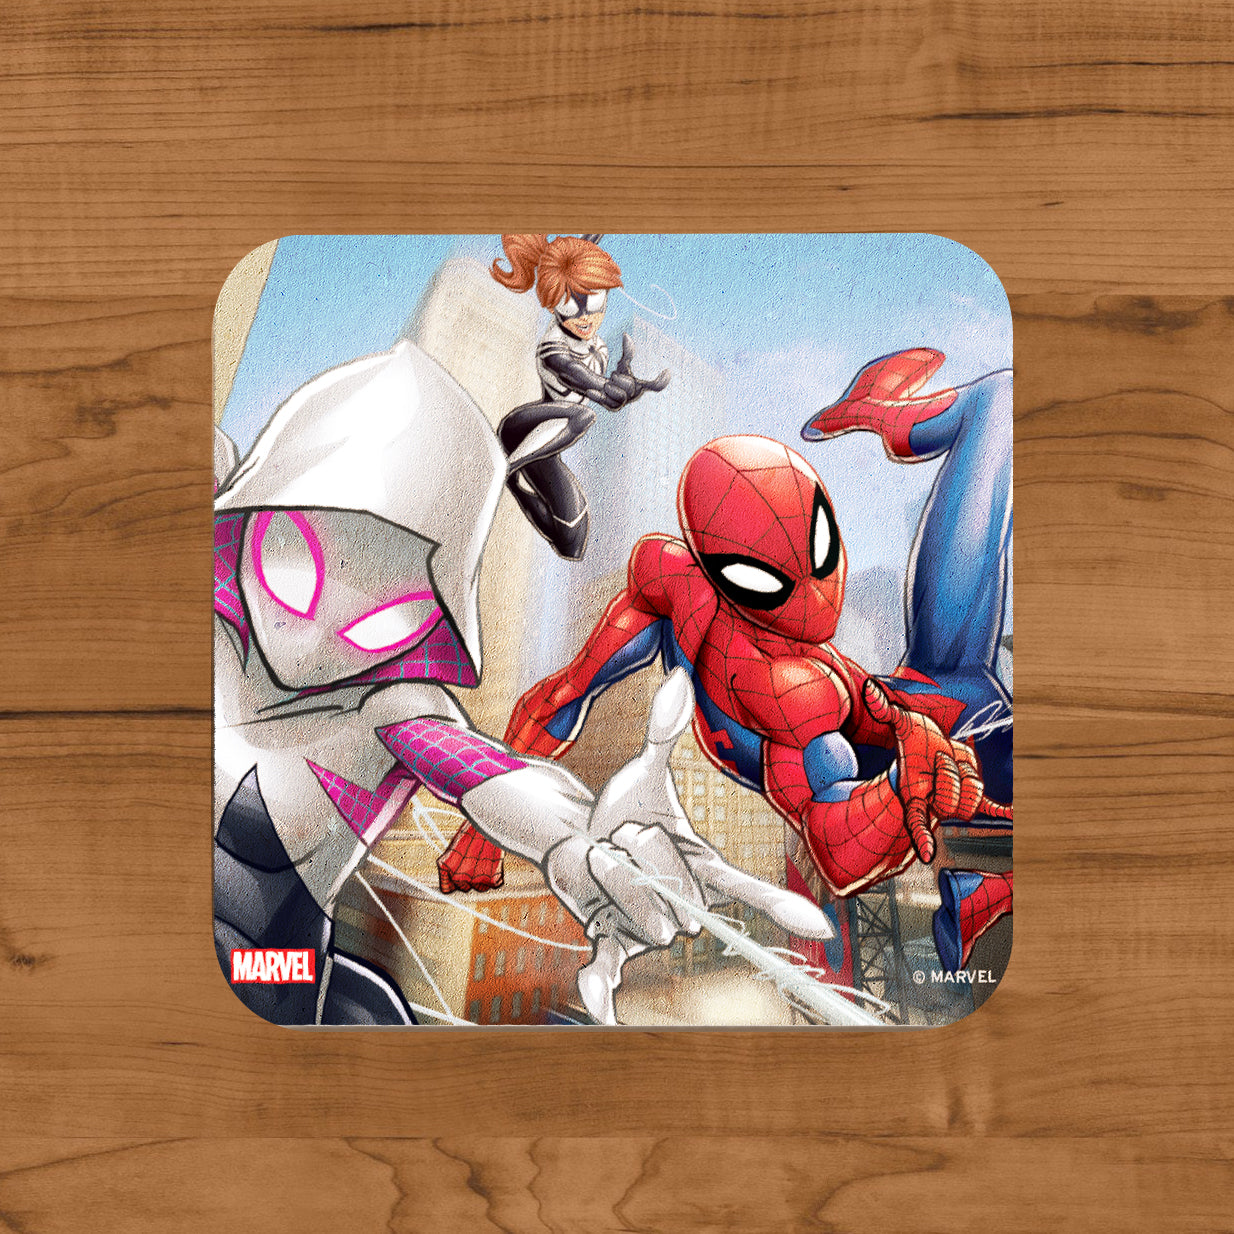 Spider-Man: Spider-Man Character Trio        - Officially Licensed Marvel    Coaster